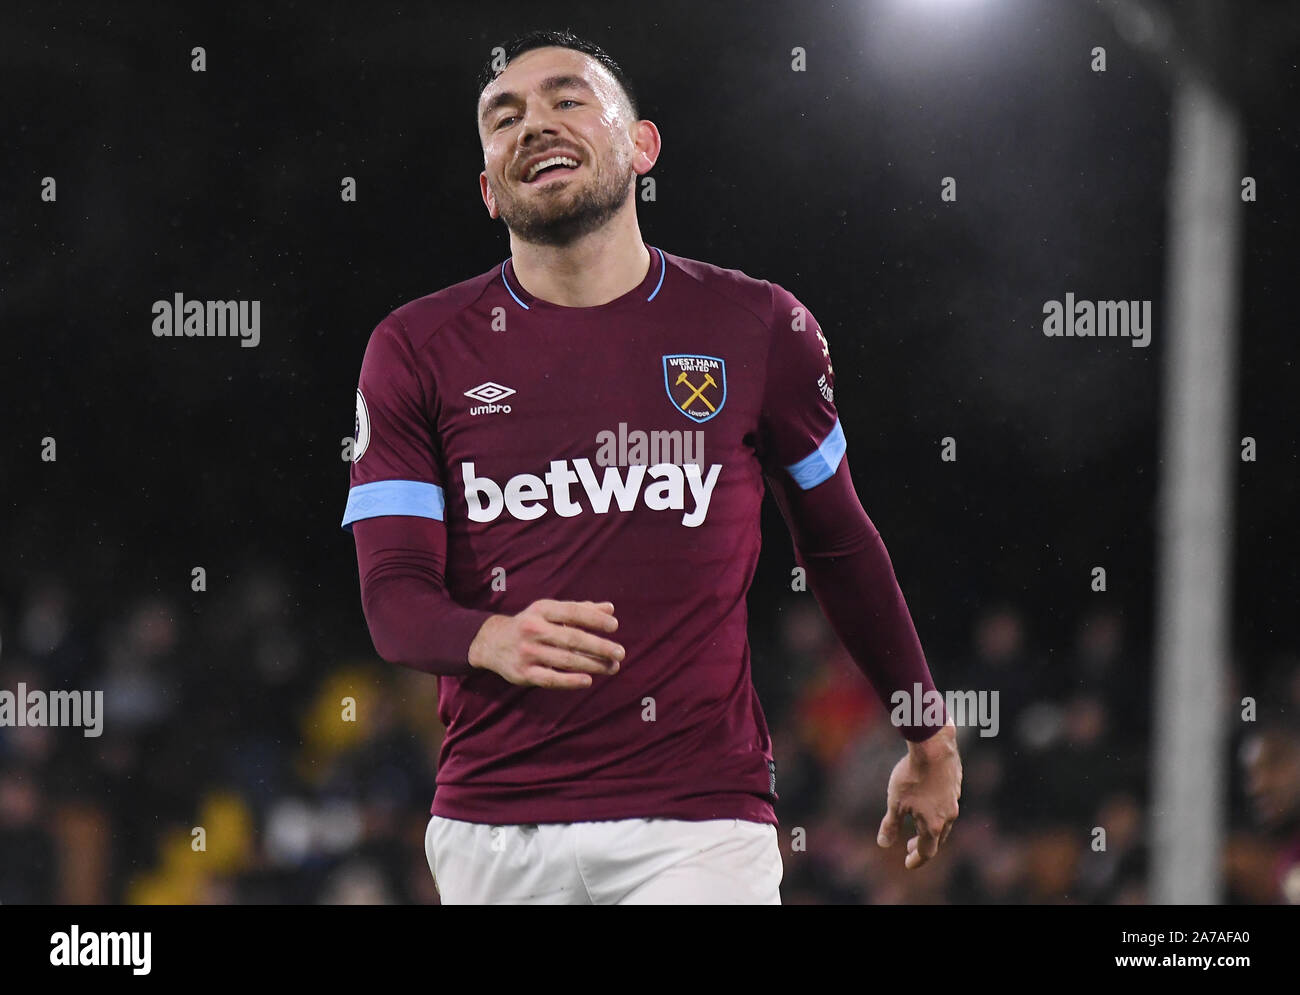 LONDON, ENGLAND - DECEMBER 15, 2018: Robert Snodgrass of West Ham pictured during the 2018/19 Premier League game between Fulham FC FC and West Ham United at Craven Cottage. Stock Photo